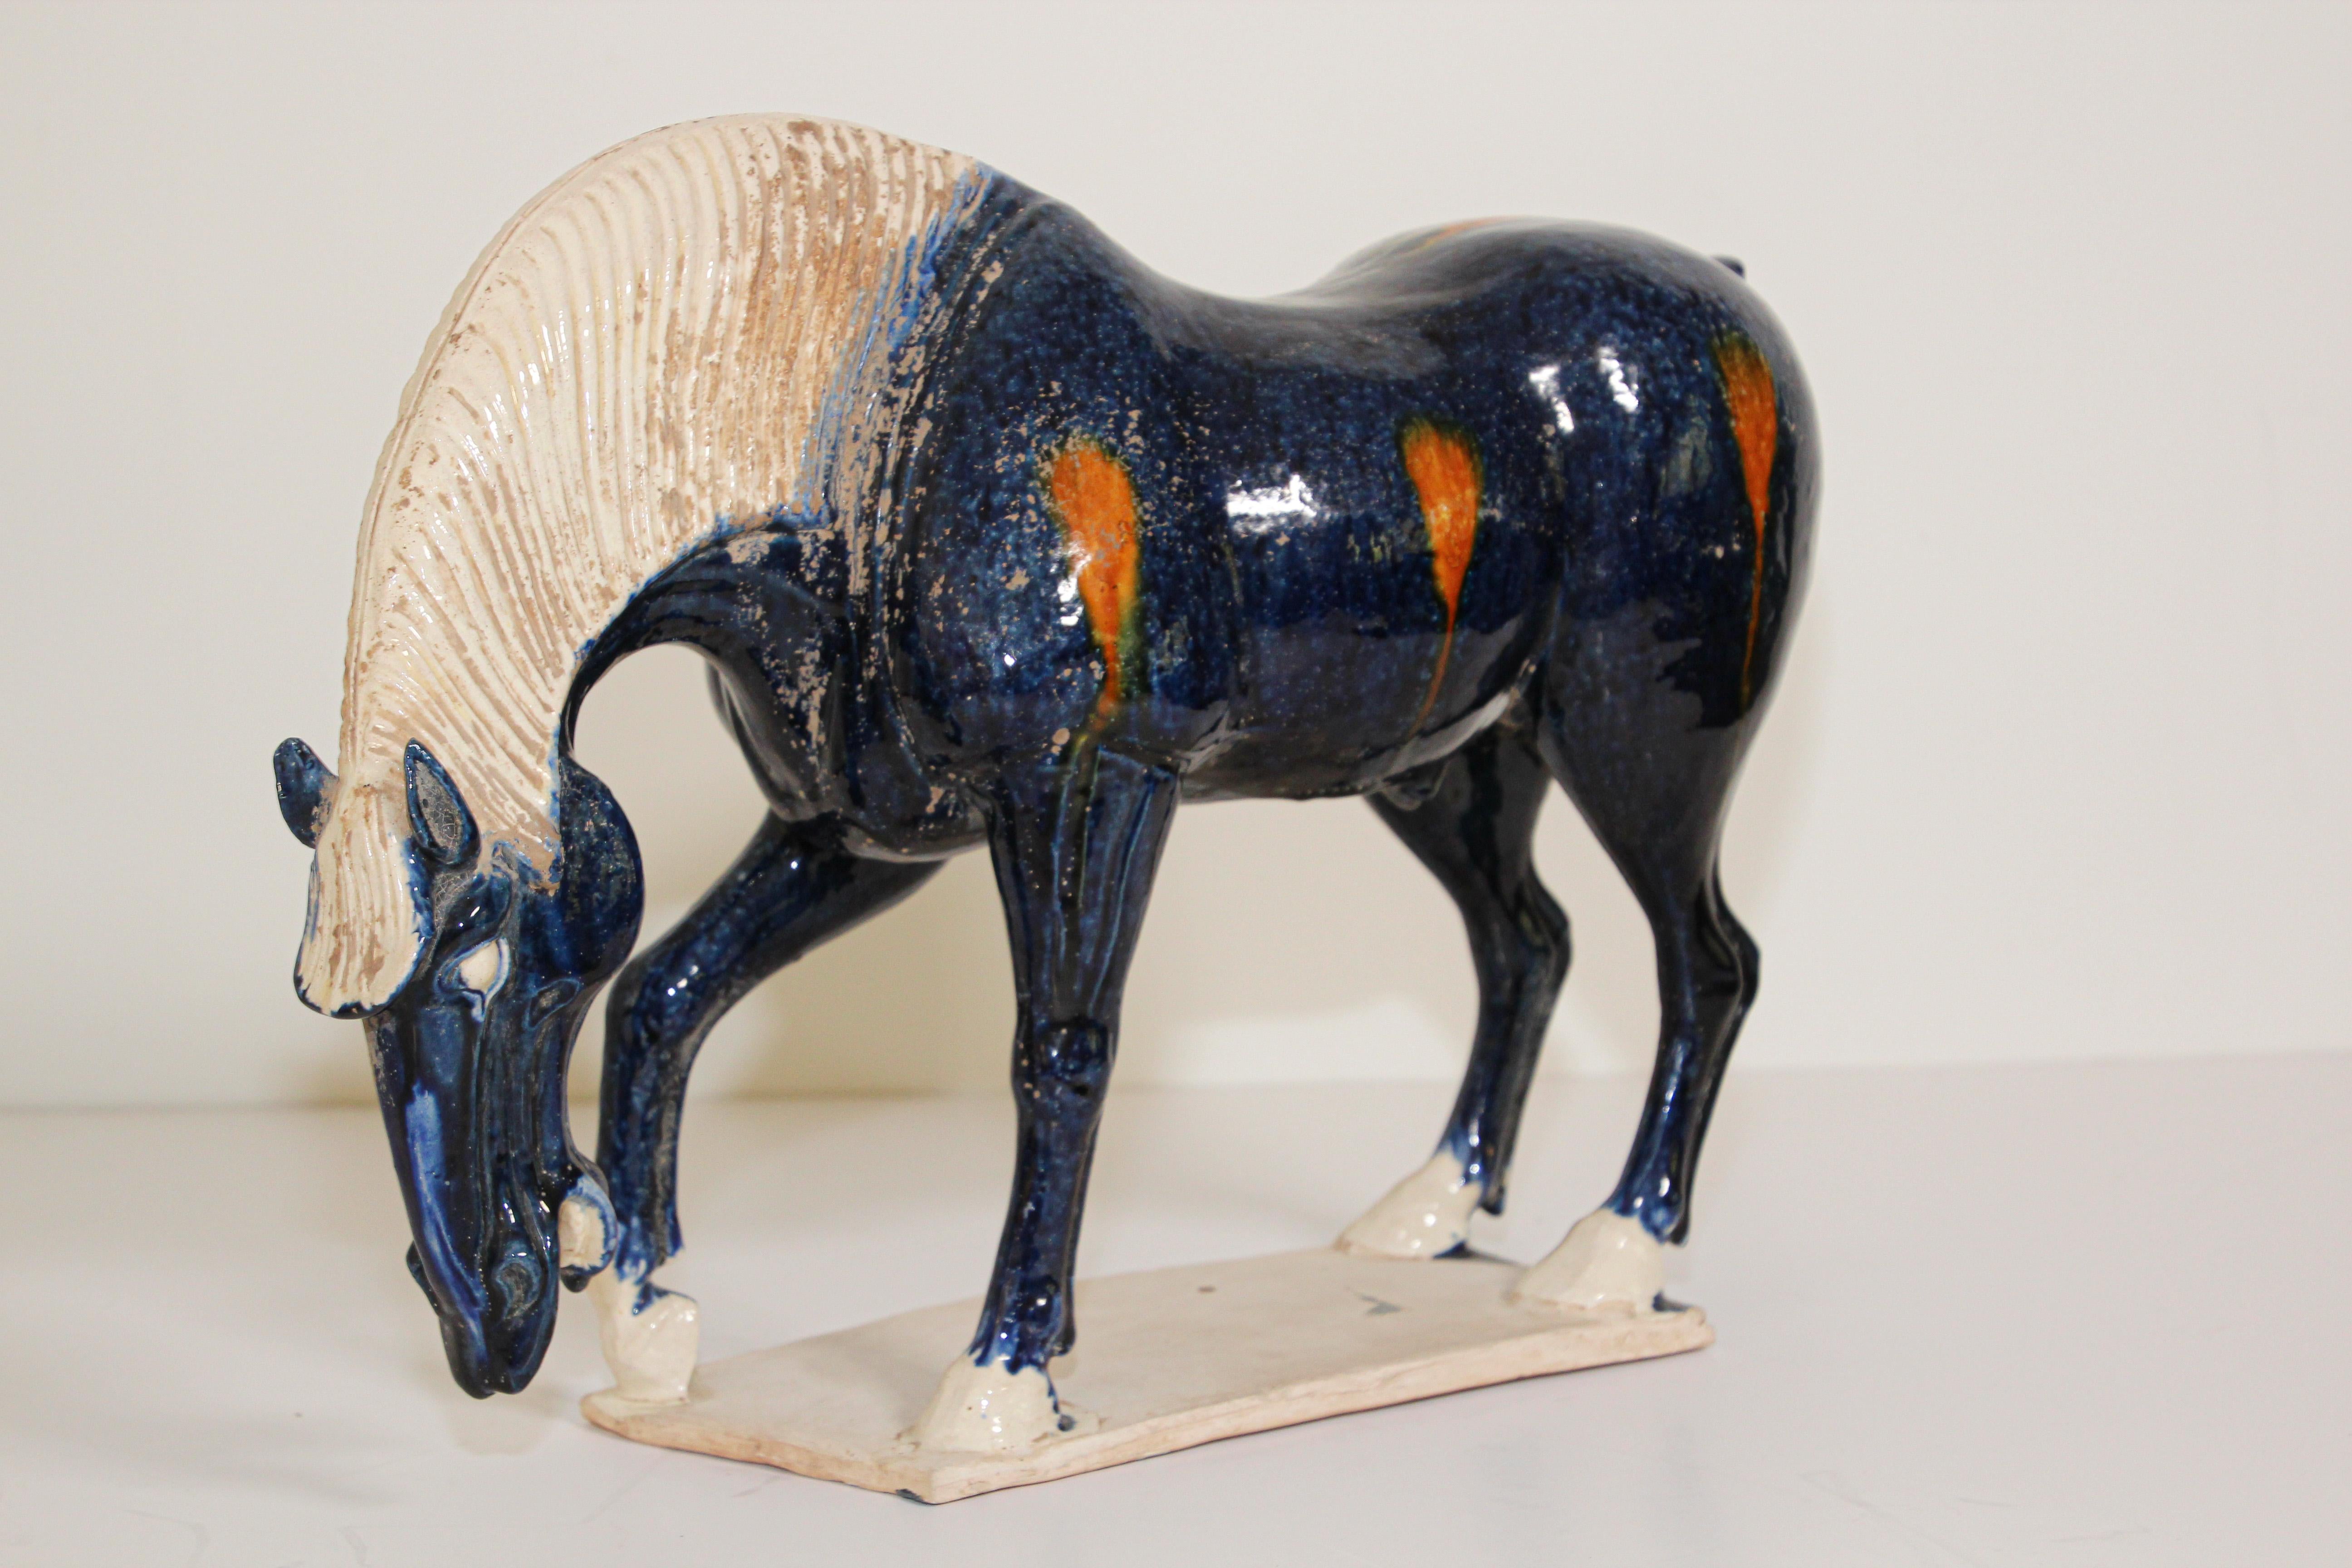 Vintage Sancai glazed blue pottery horse statue Chinese Tang Dynasty manner.
Made from traditional glazed ceramic in glossy blue and orange.
The Tang Dynasty was one of the most brilliant periods in China's long history - was characterized by a